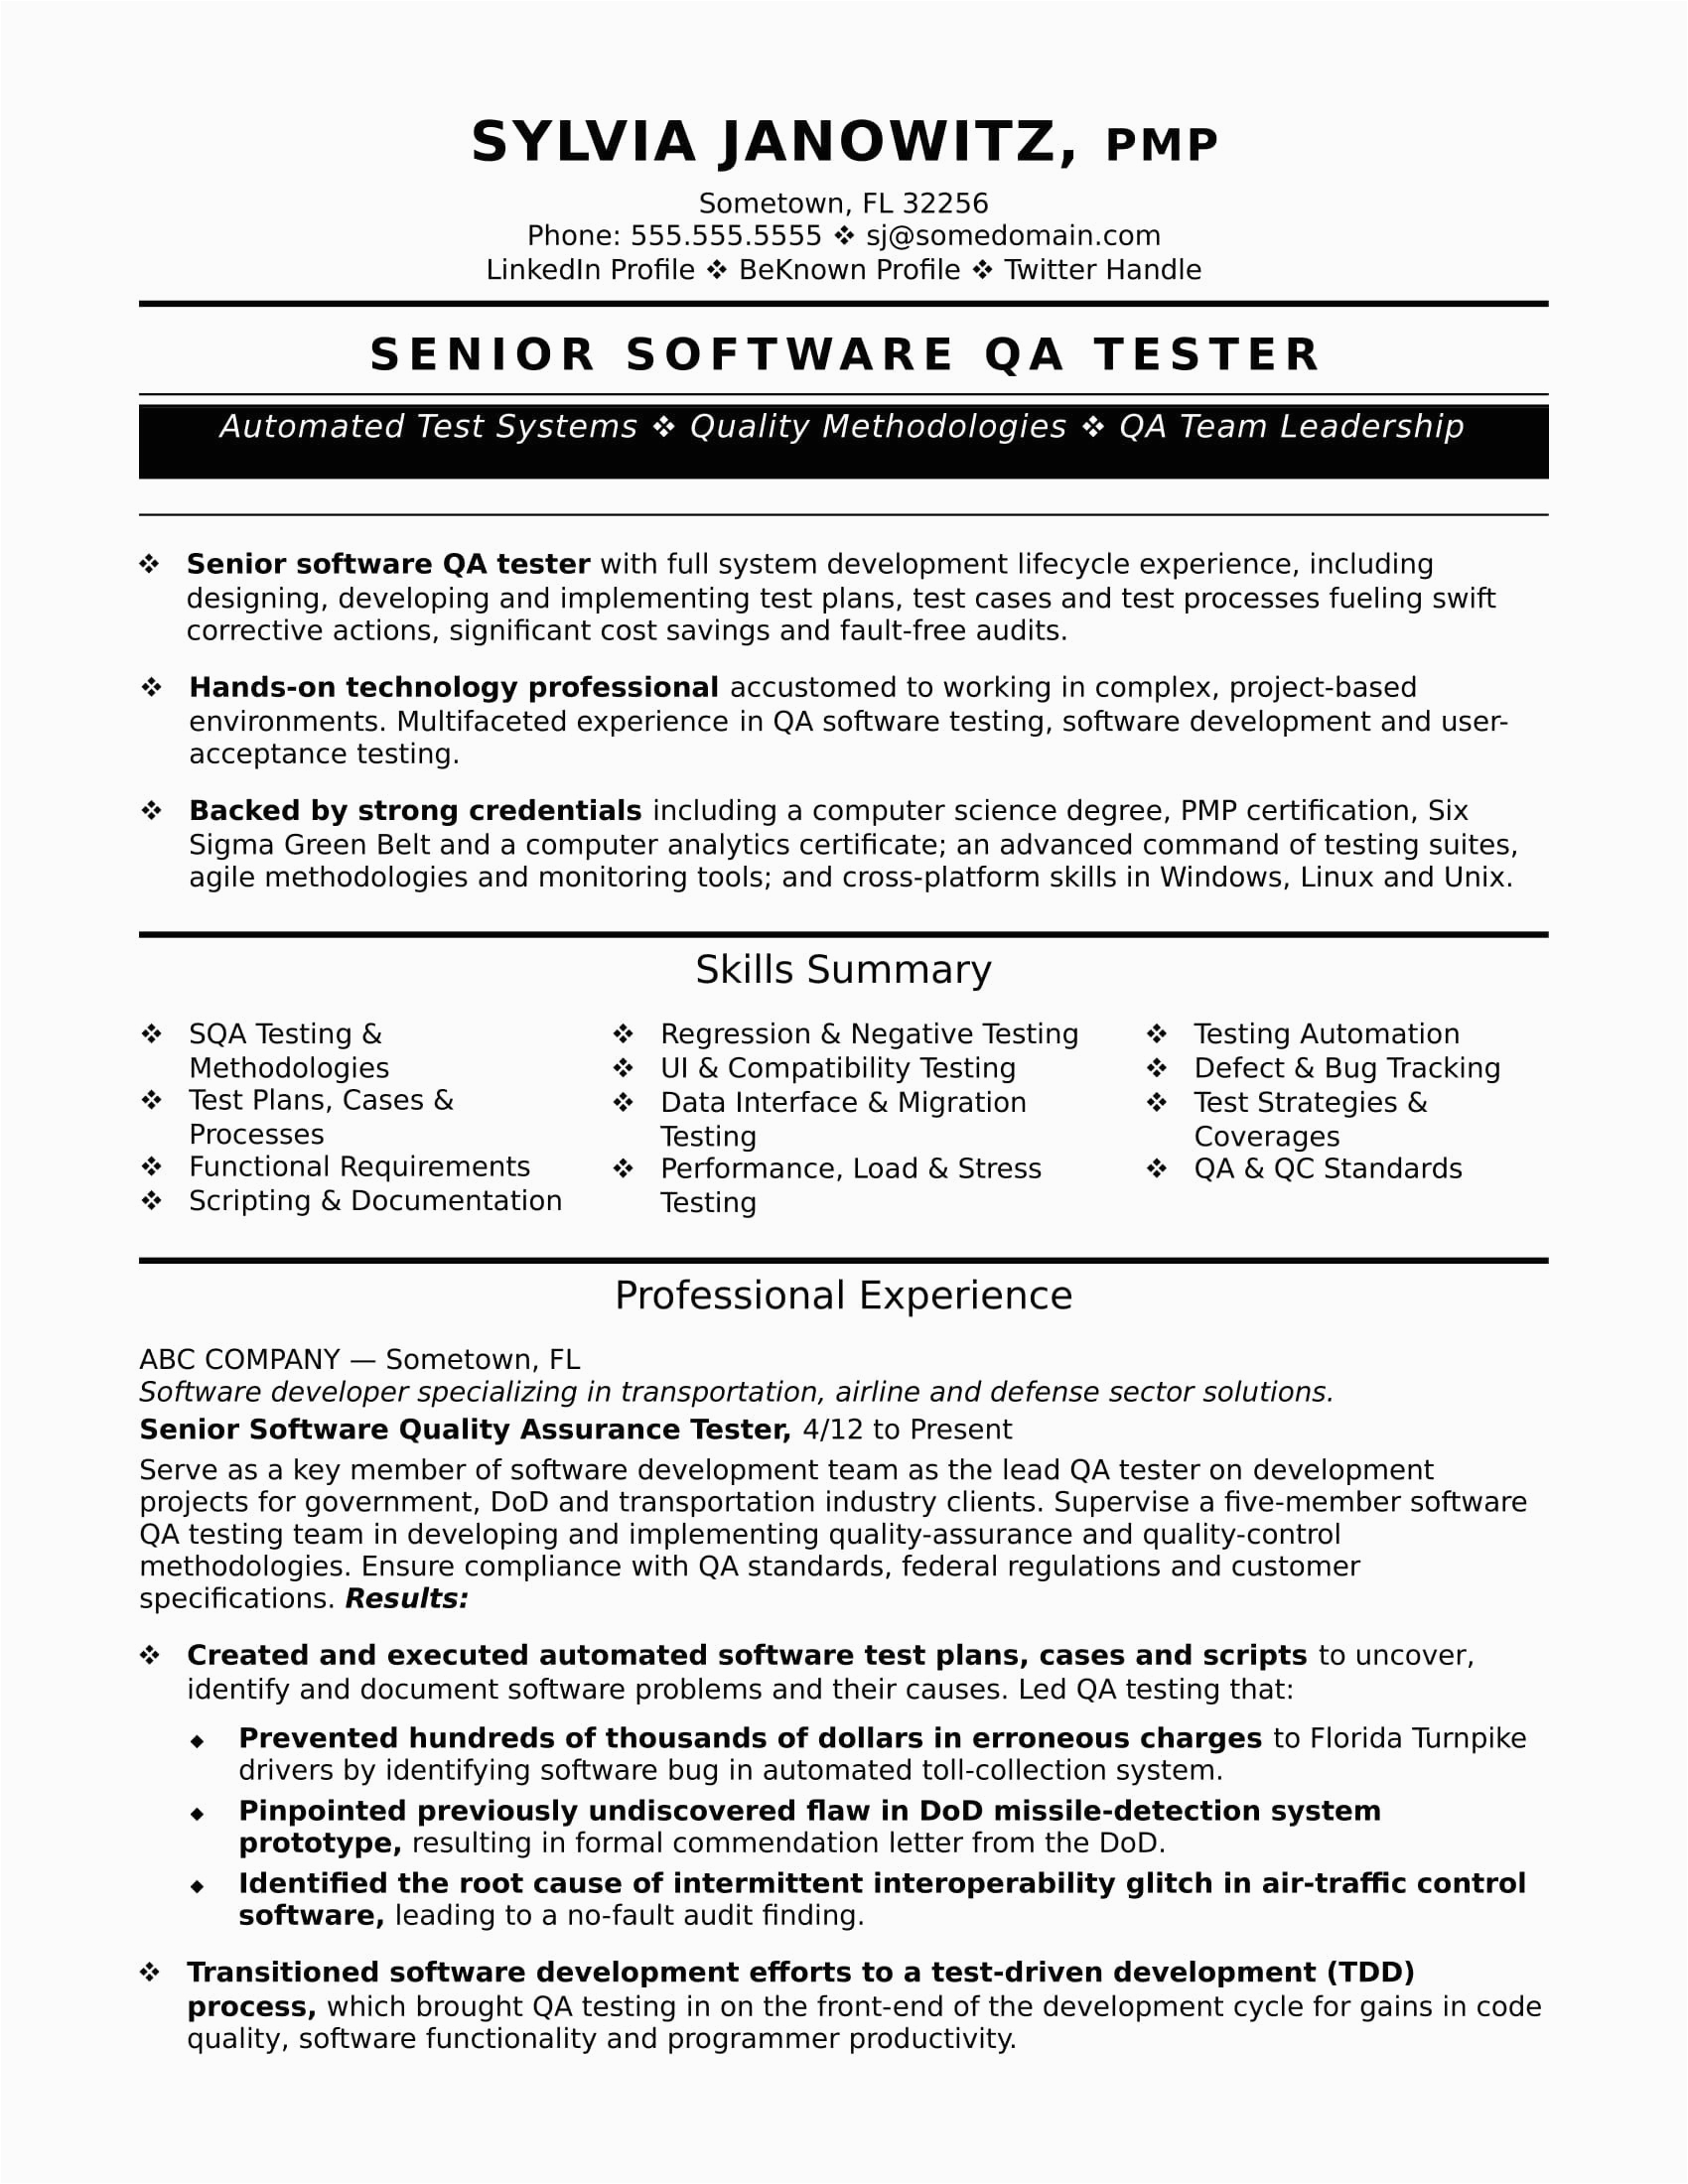 Resume Samples for Experienced software Professionals Sample Resume for Experienced software Test Engineer Best Resume Examples